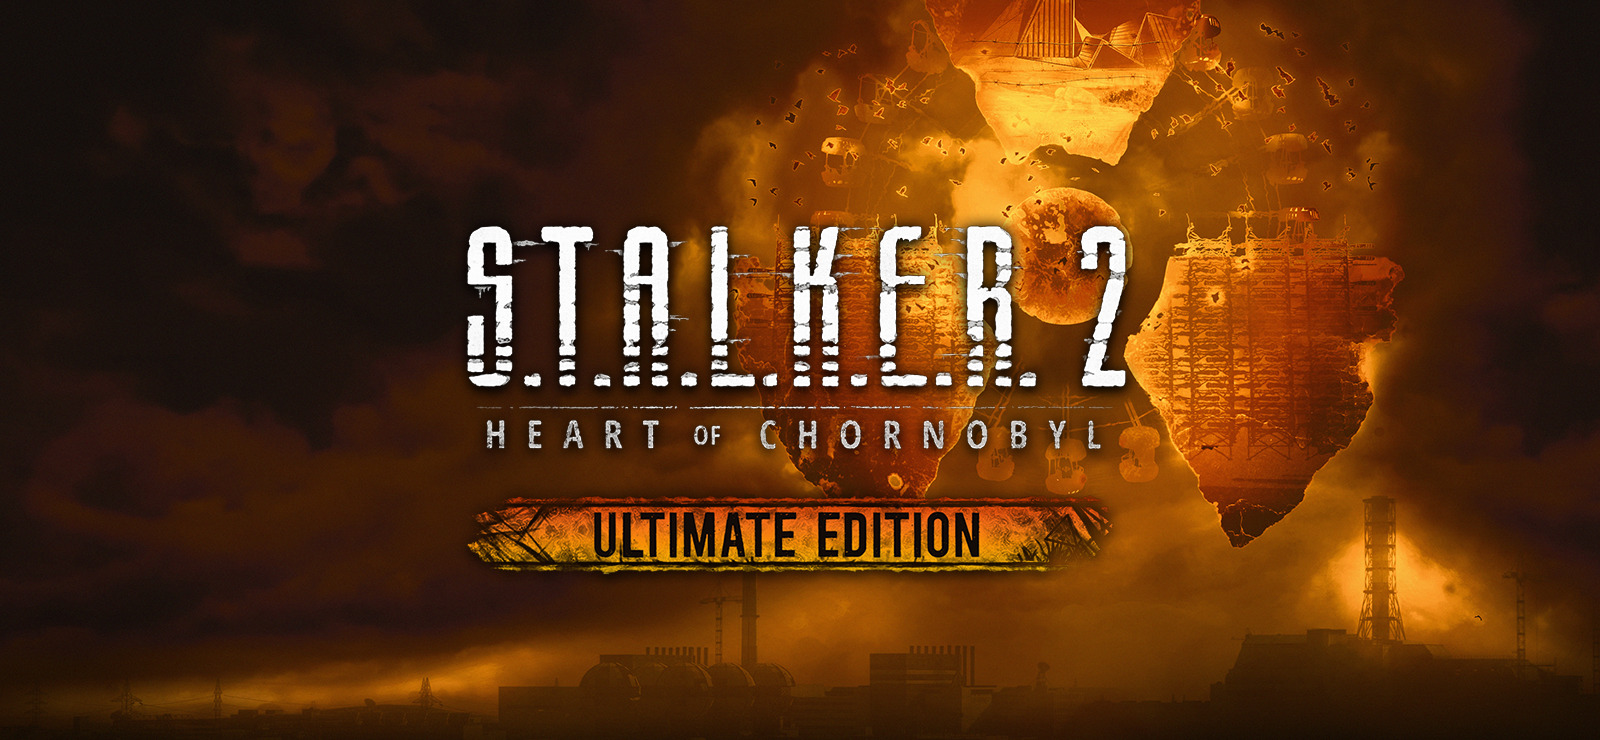 Retail editions of S.T.A.L.K.E.R. 2: Heart of Chernobyl are